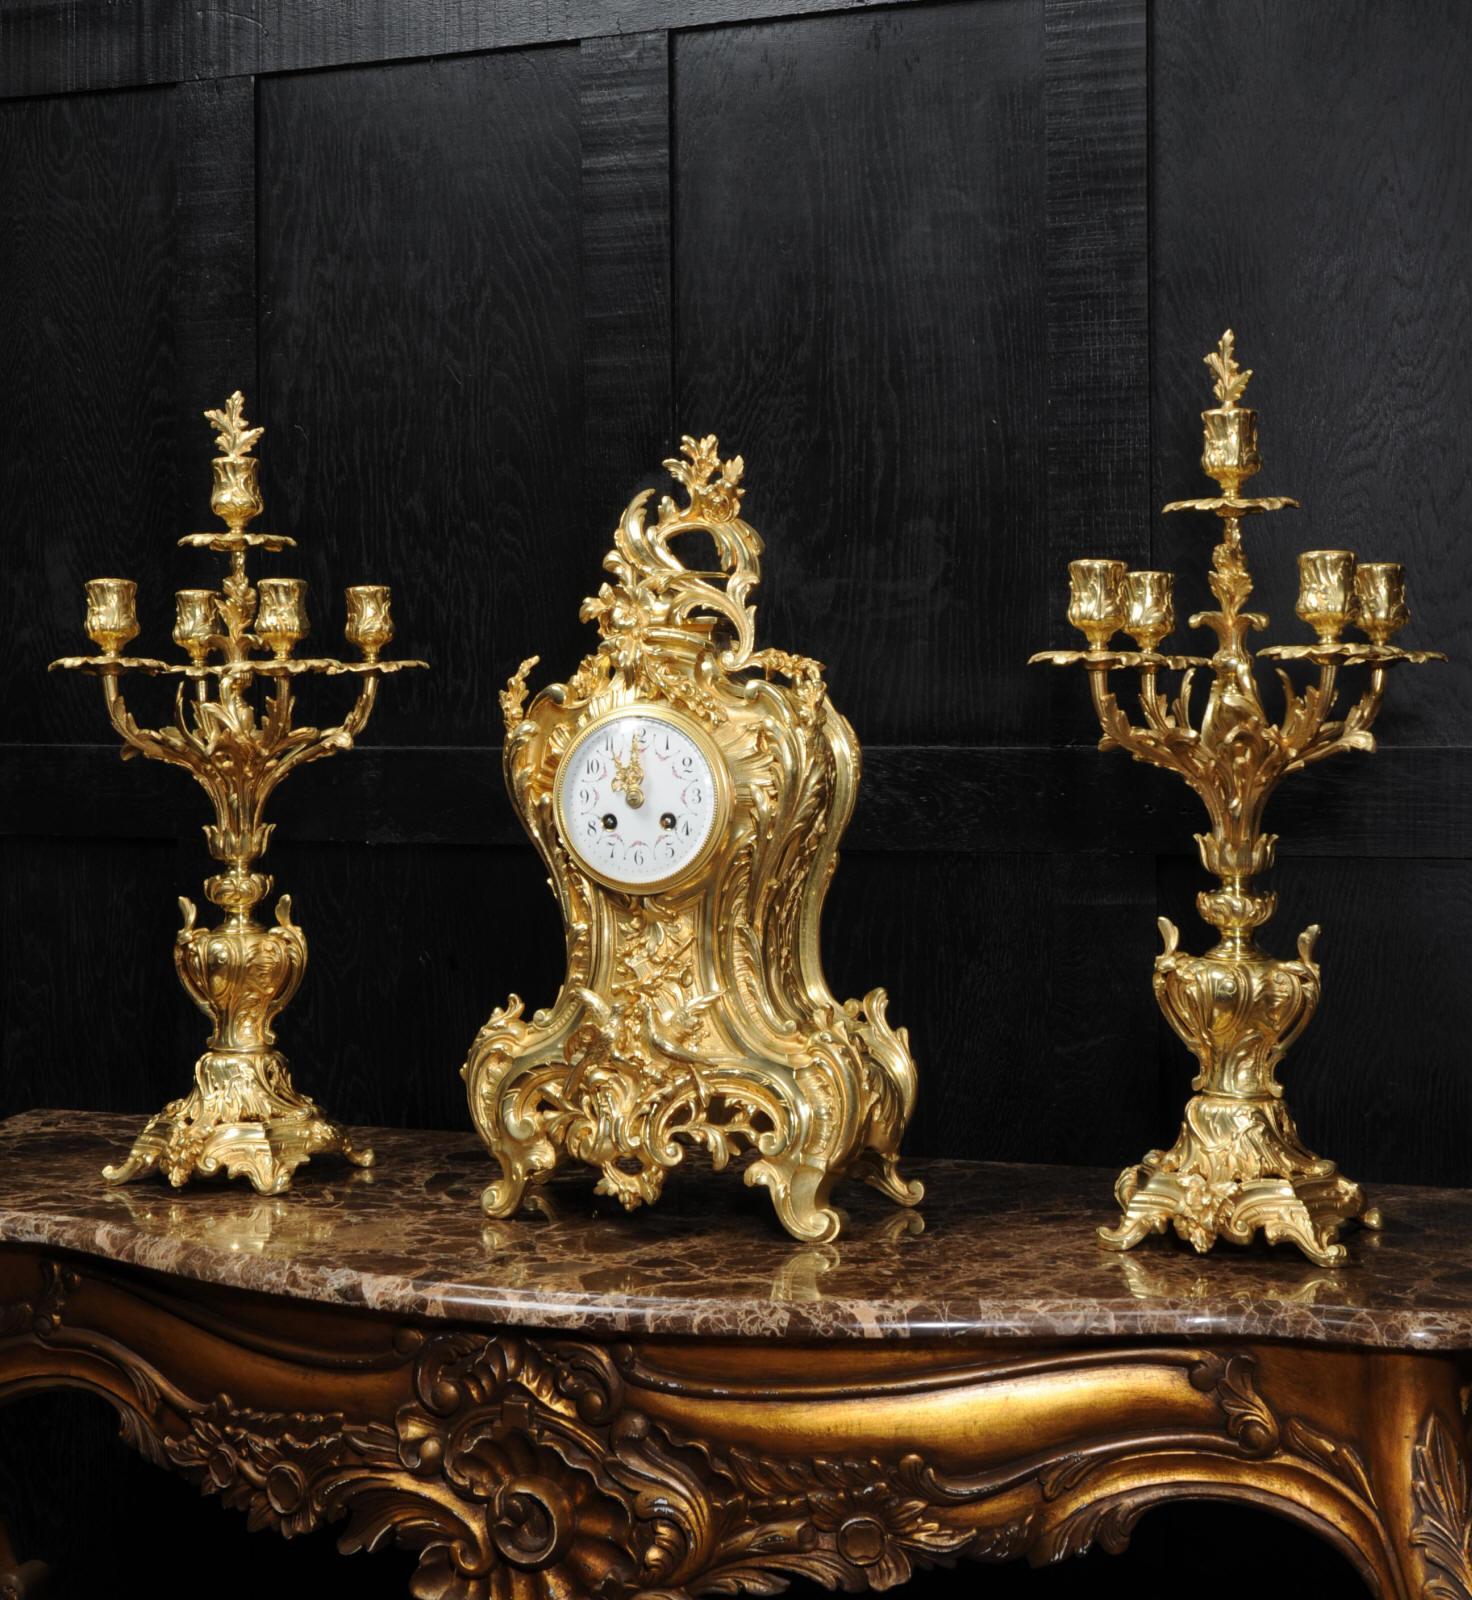 A large and stunning original antique French gilt bronze clock set by Japy Freres, circa 1890. The clock is of waisted shape, formed of 'C' scrolls and acanthus. Below the dial is a panel of musical trophies and a pair of birds, symbolic of love. To